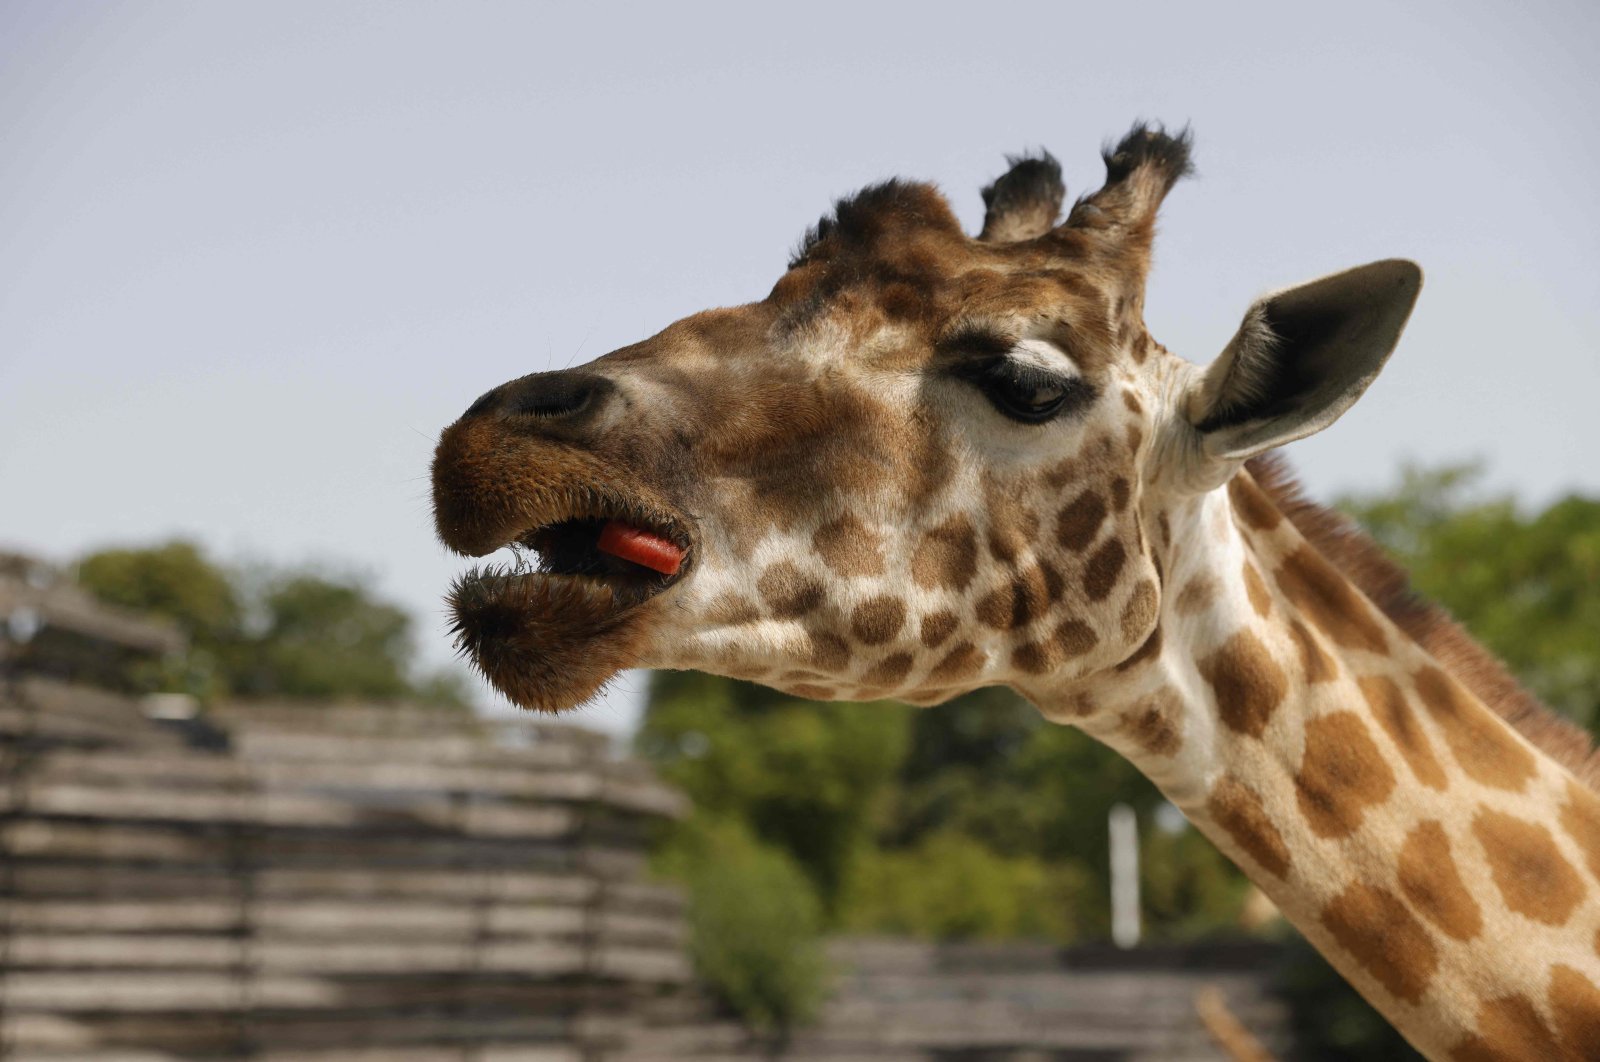 A giraffe eats watermelon, as zookeepers monitor the animals during heatwave conditions sweeping across France, in the Vincennes Zoo, Paris, France, June 18, 2022. (AFP Photo)